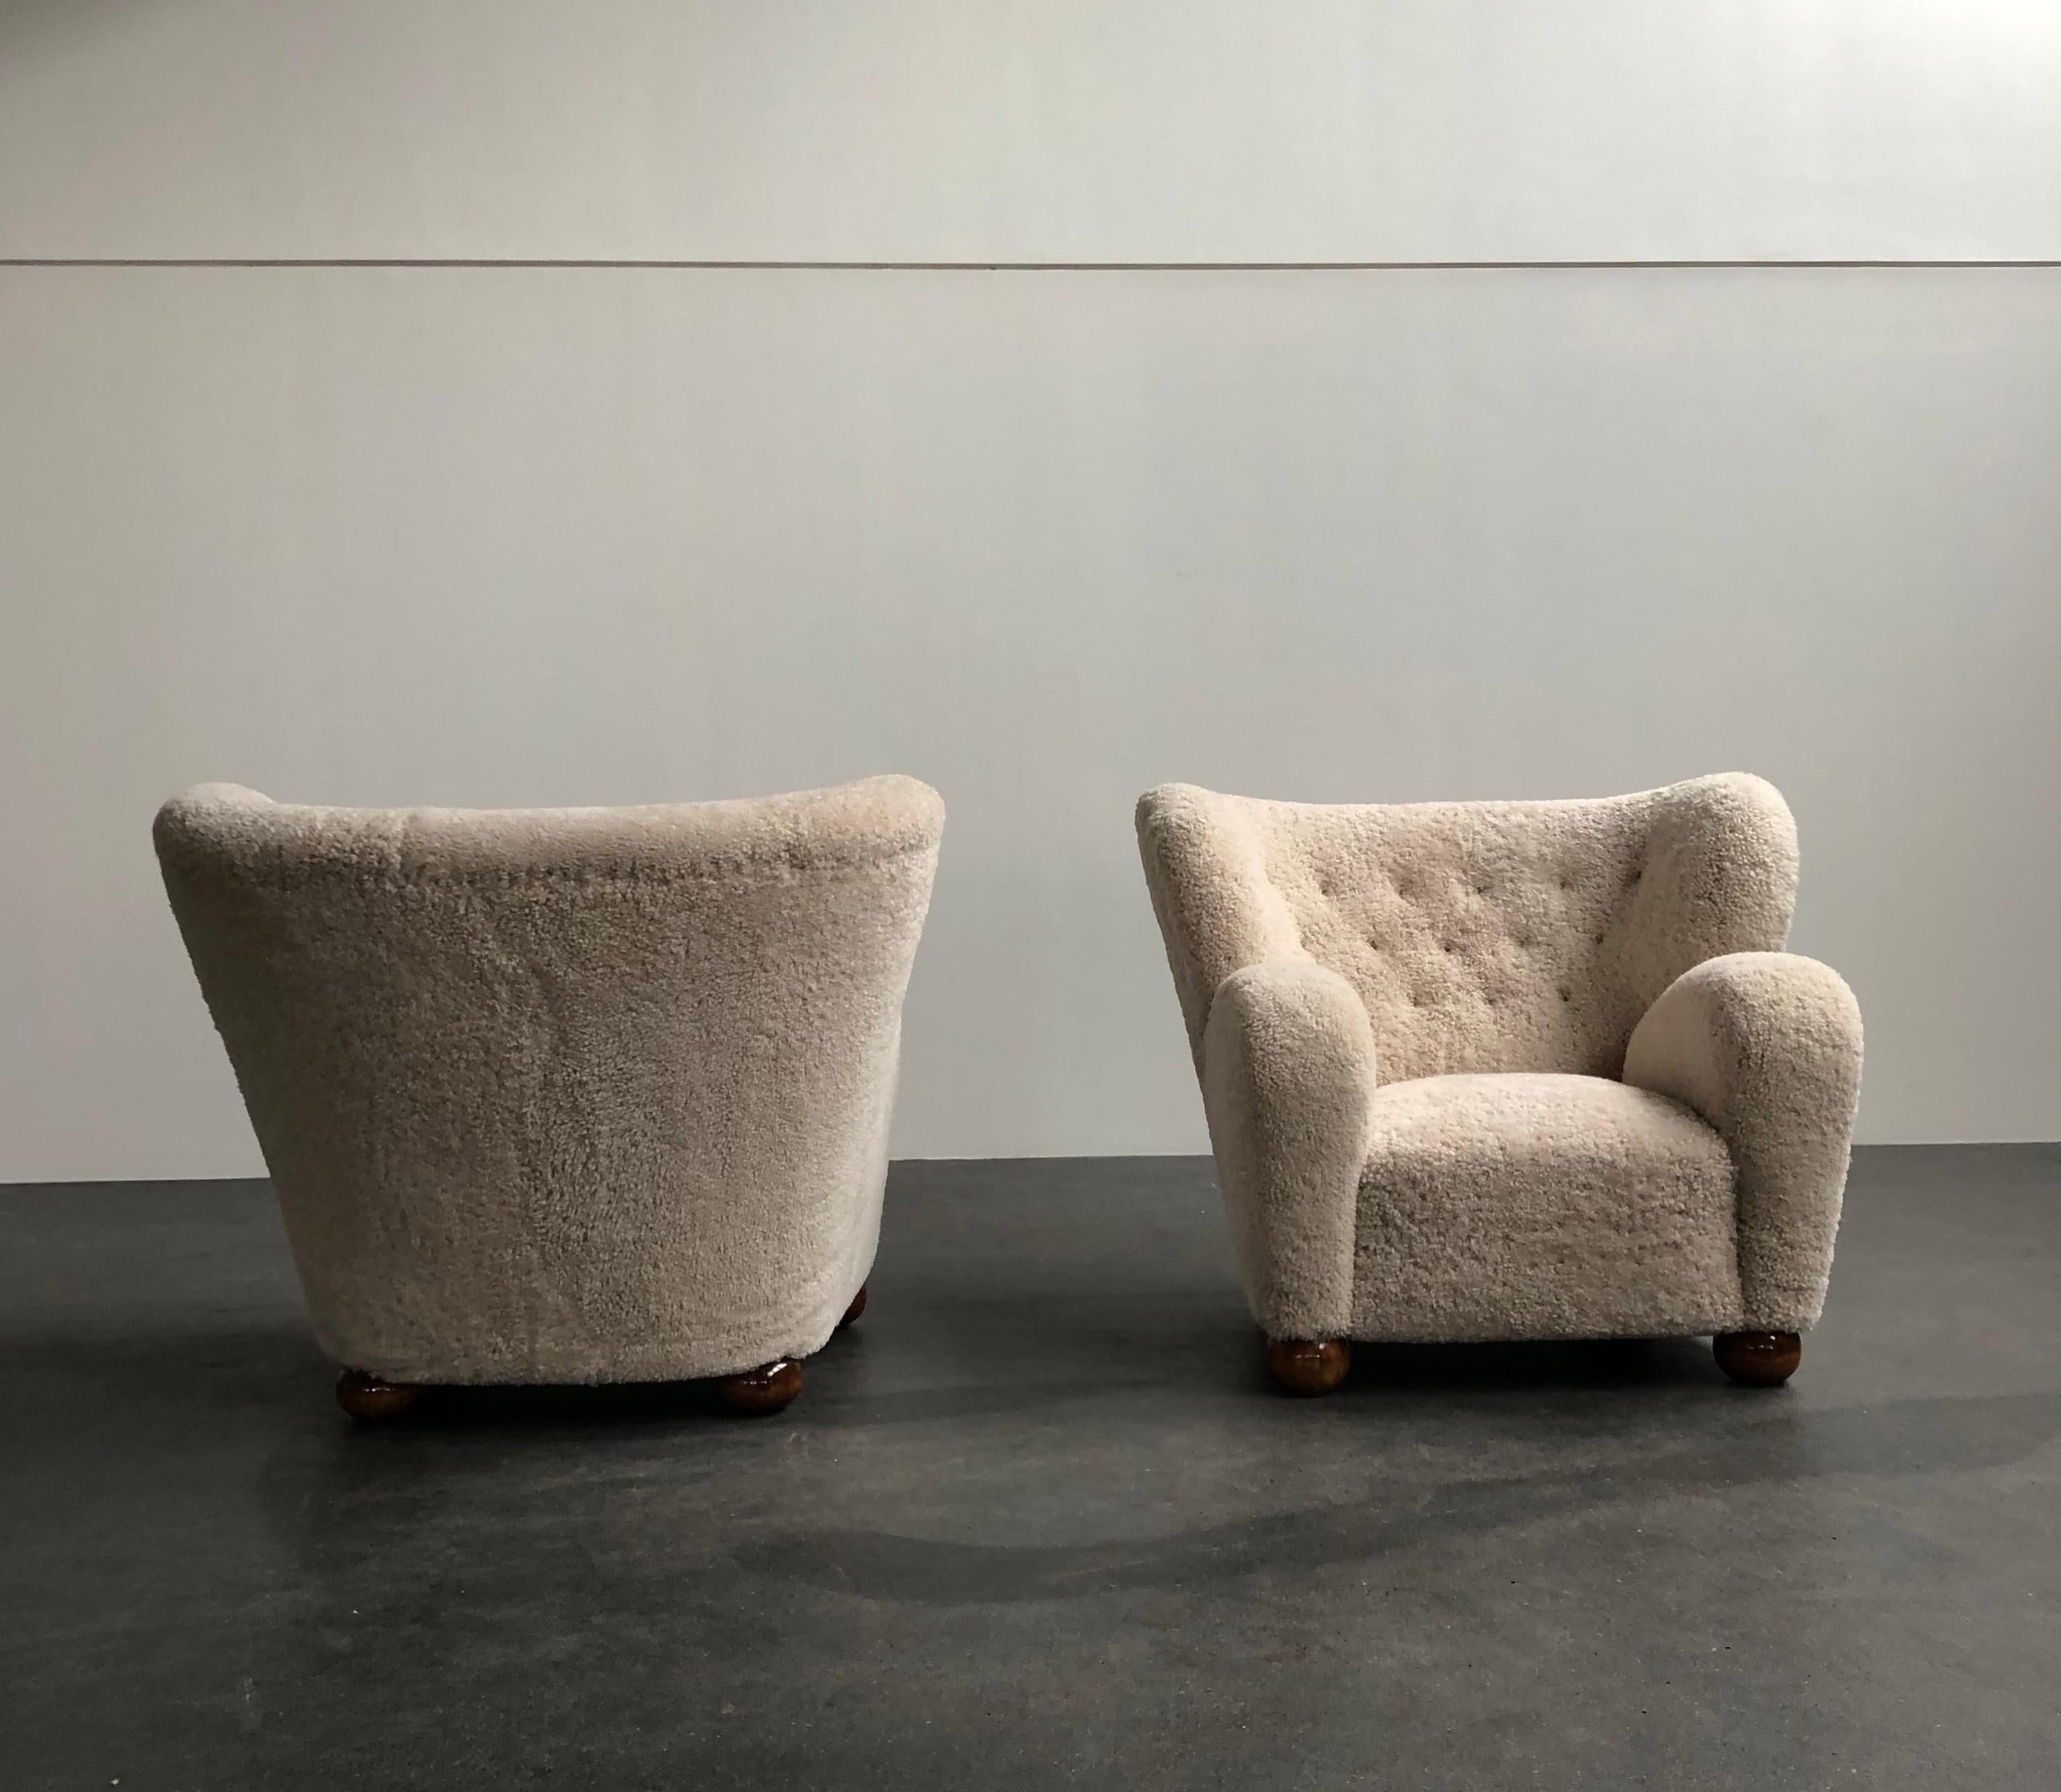 Scandinavian Modern Marta Blomstedt Pair of Easy Chairs in Sheepskin for Hotel Aulanko Finland, 1939 For Sale